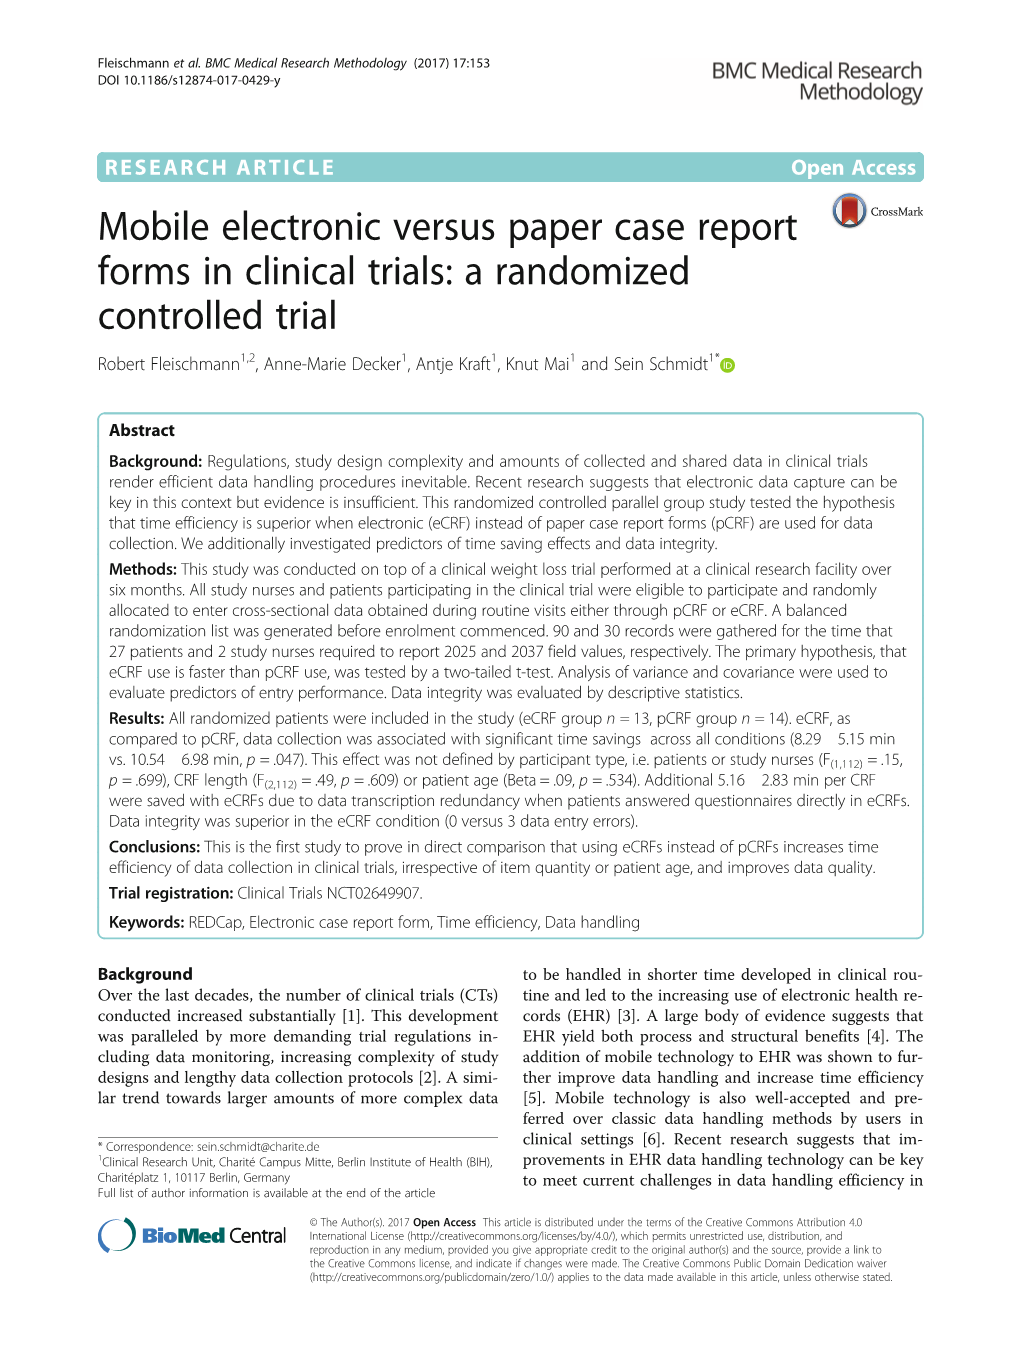 Mobile Electronic Versus Paper Case Report Forms in Clinical Trials